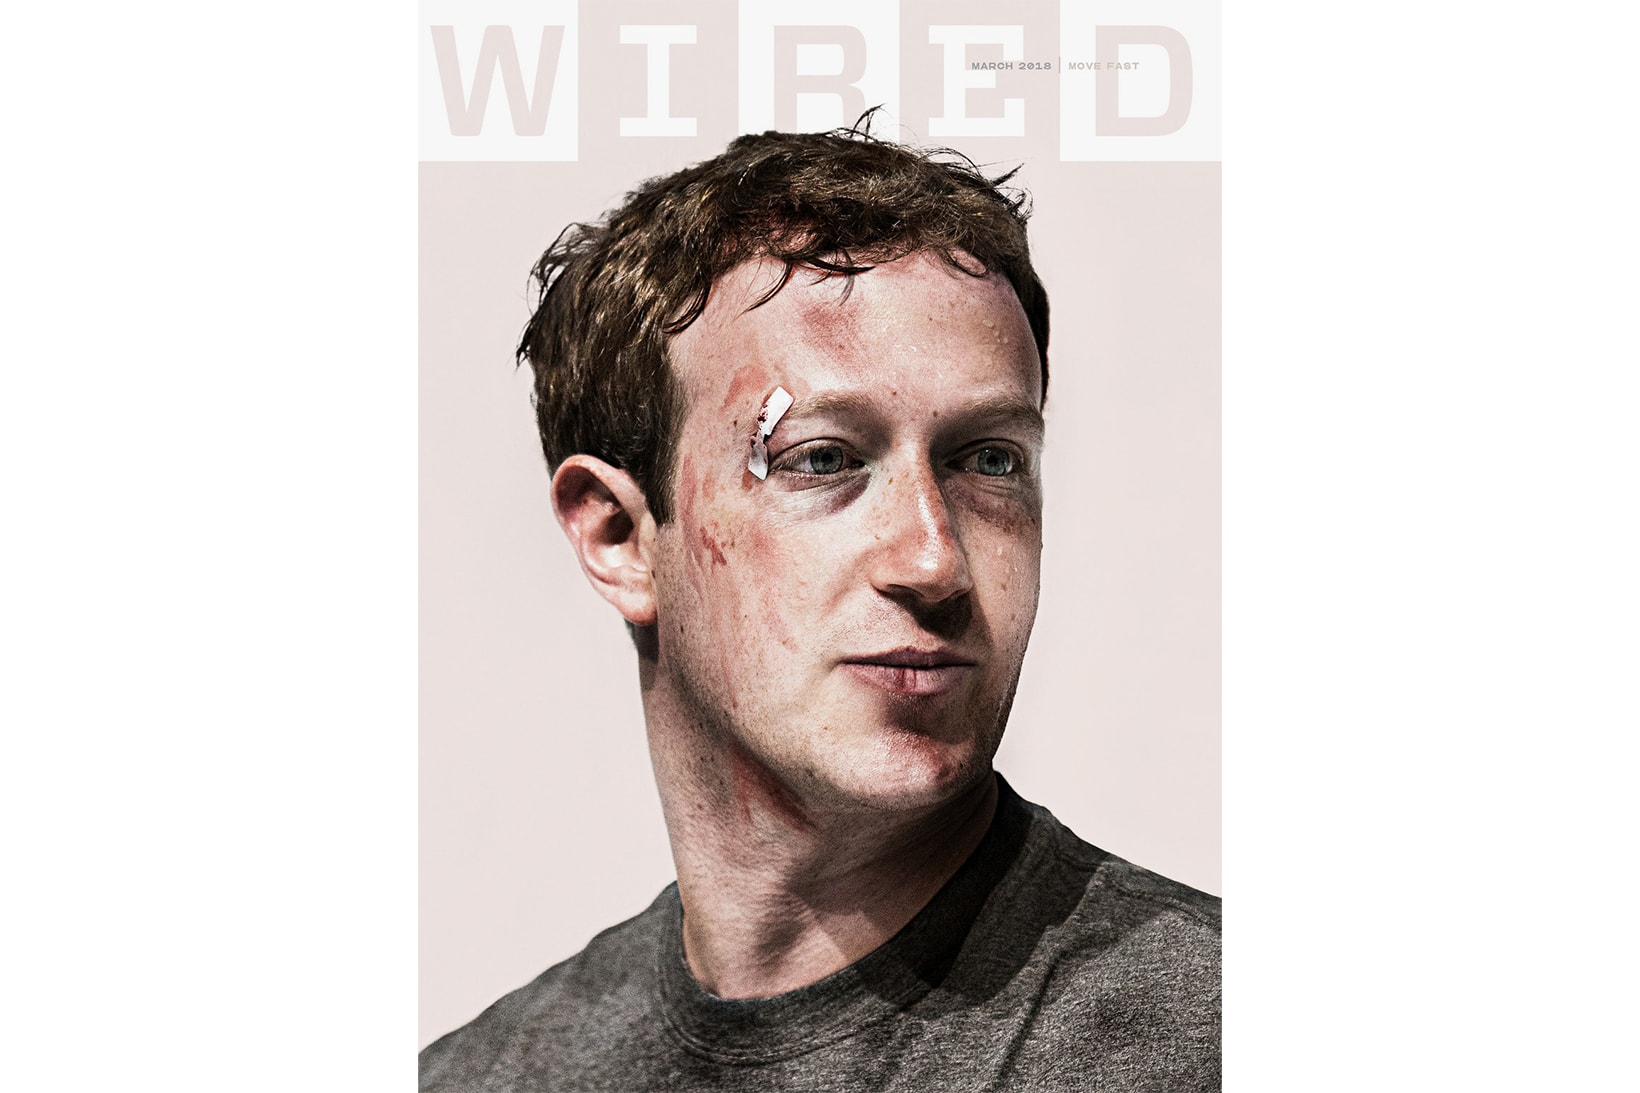 Mark Zuckerberg WIRED Cover 2018 March jake rowland issue bruise black eye scar composite photo